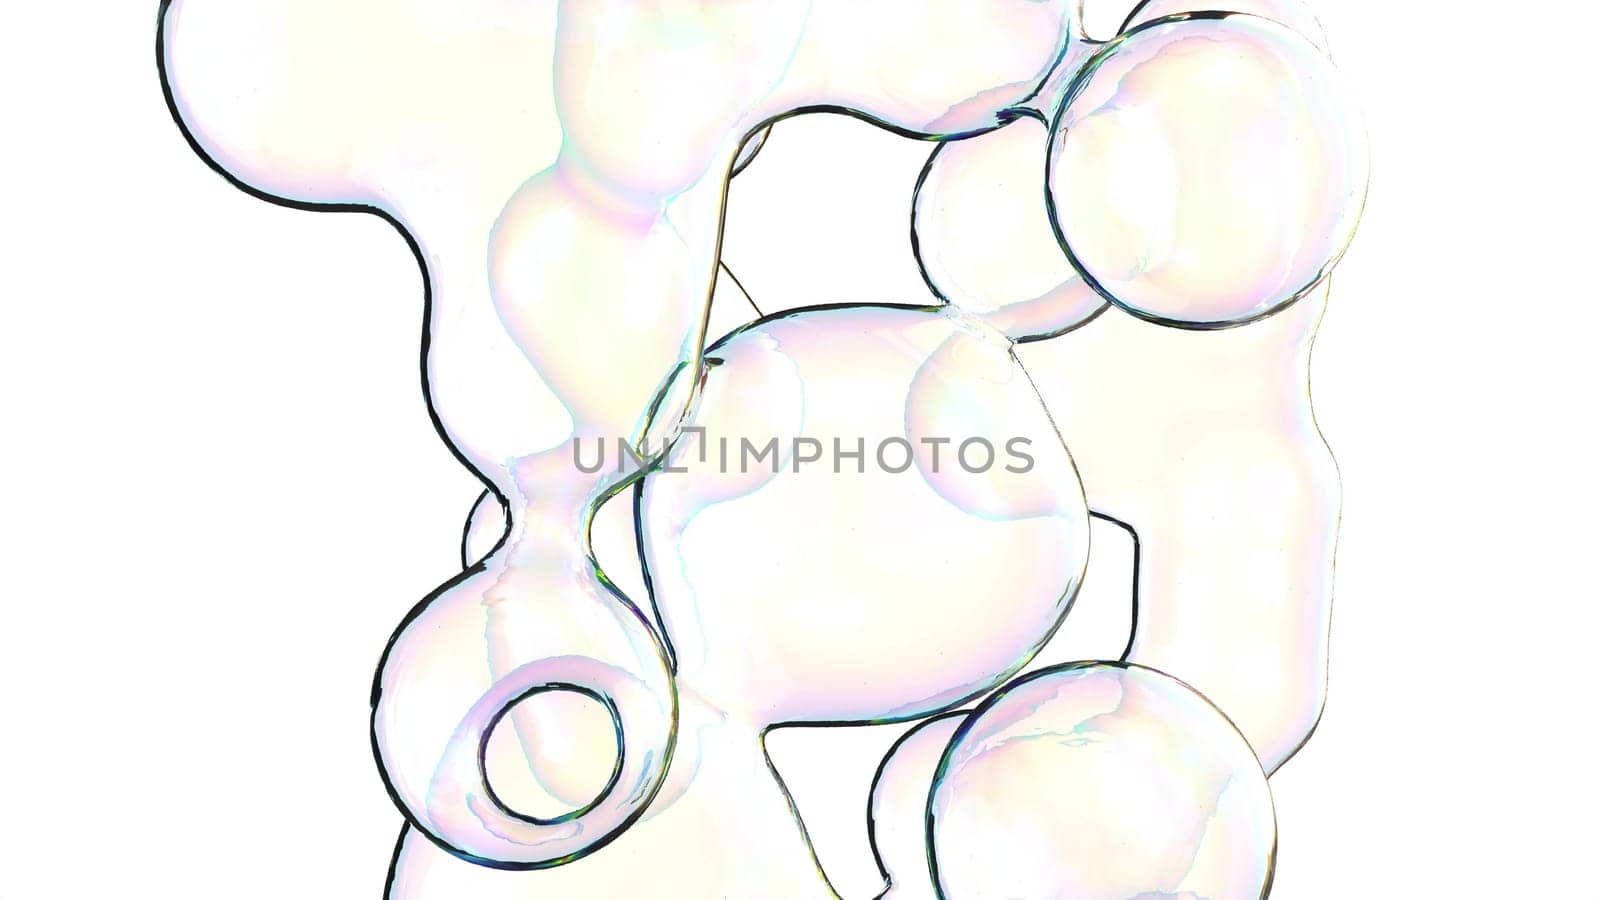 Abstract bubble metaball shapes on white back holographic colors 3d render by Zozulinskyi